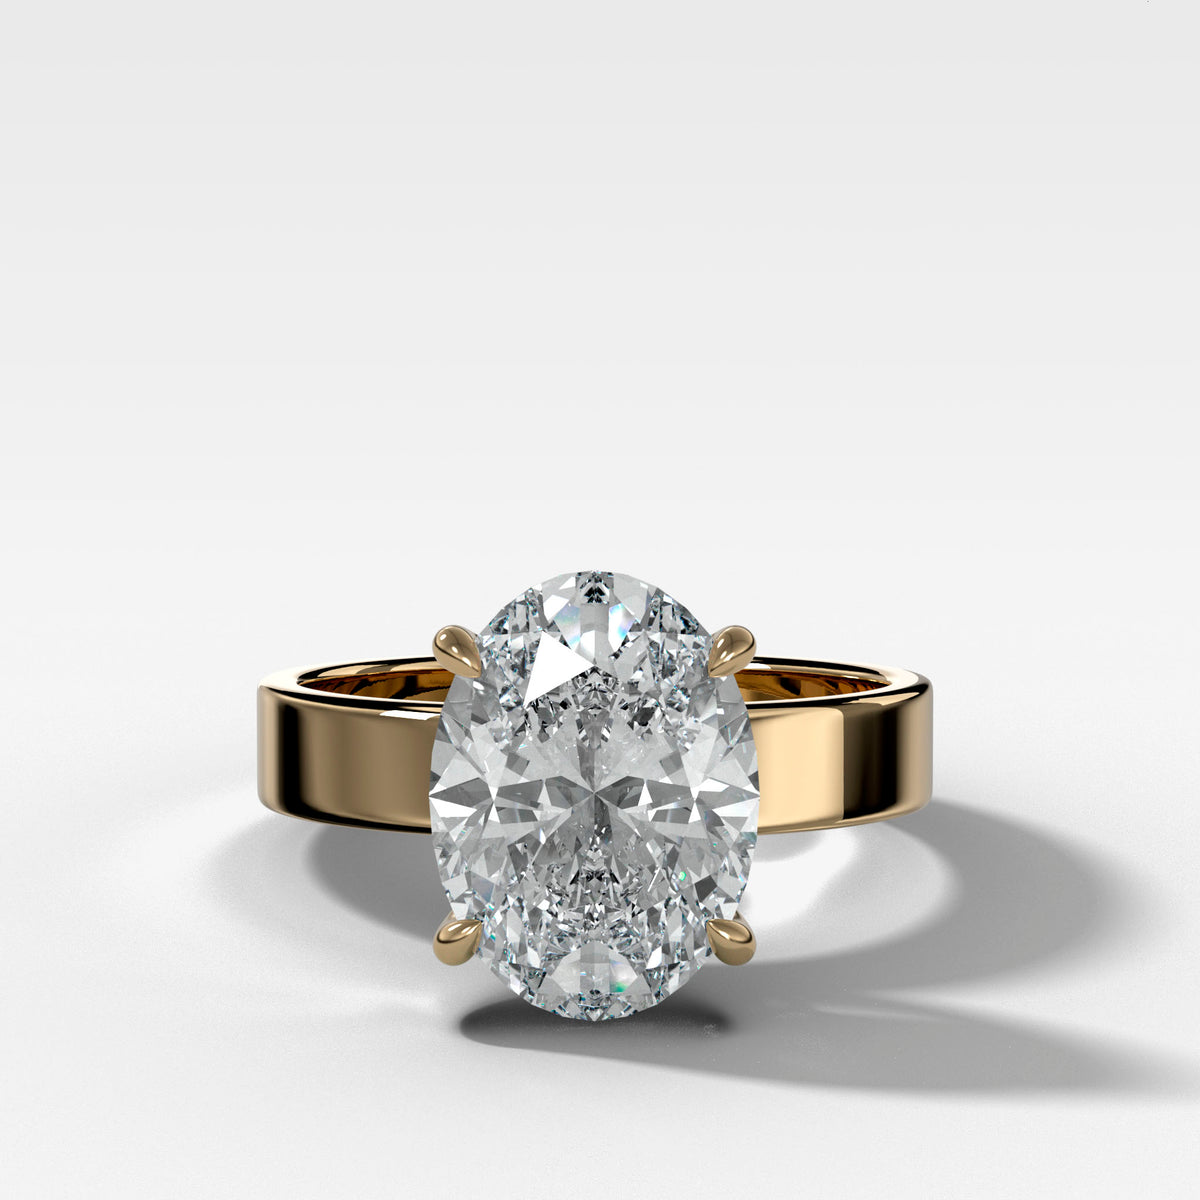 Finest Solitaire Engagement Ring With Oval Cut Diamond